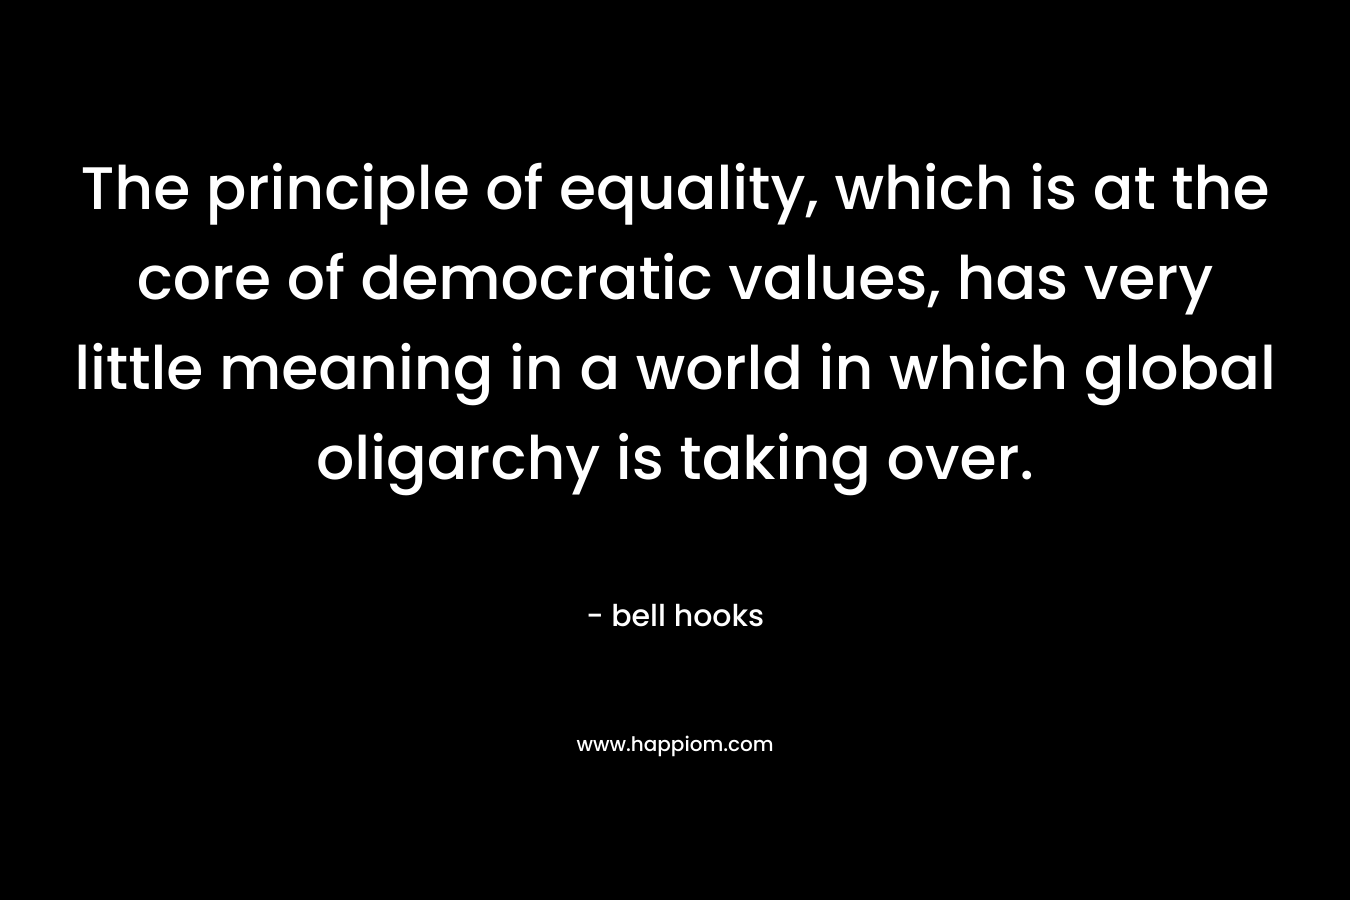 The principle of equality, which is at the core of democratic values, has very little meaning in a world in which global oligarchy is taking over. – bell hooks